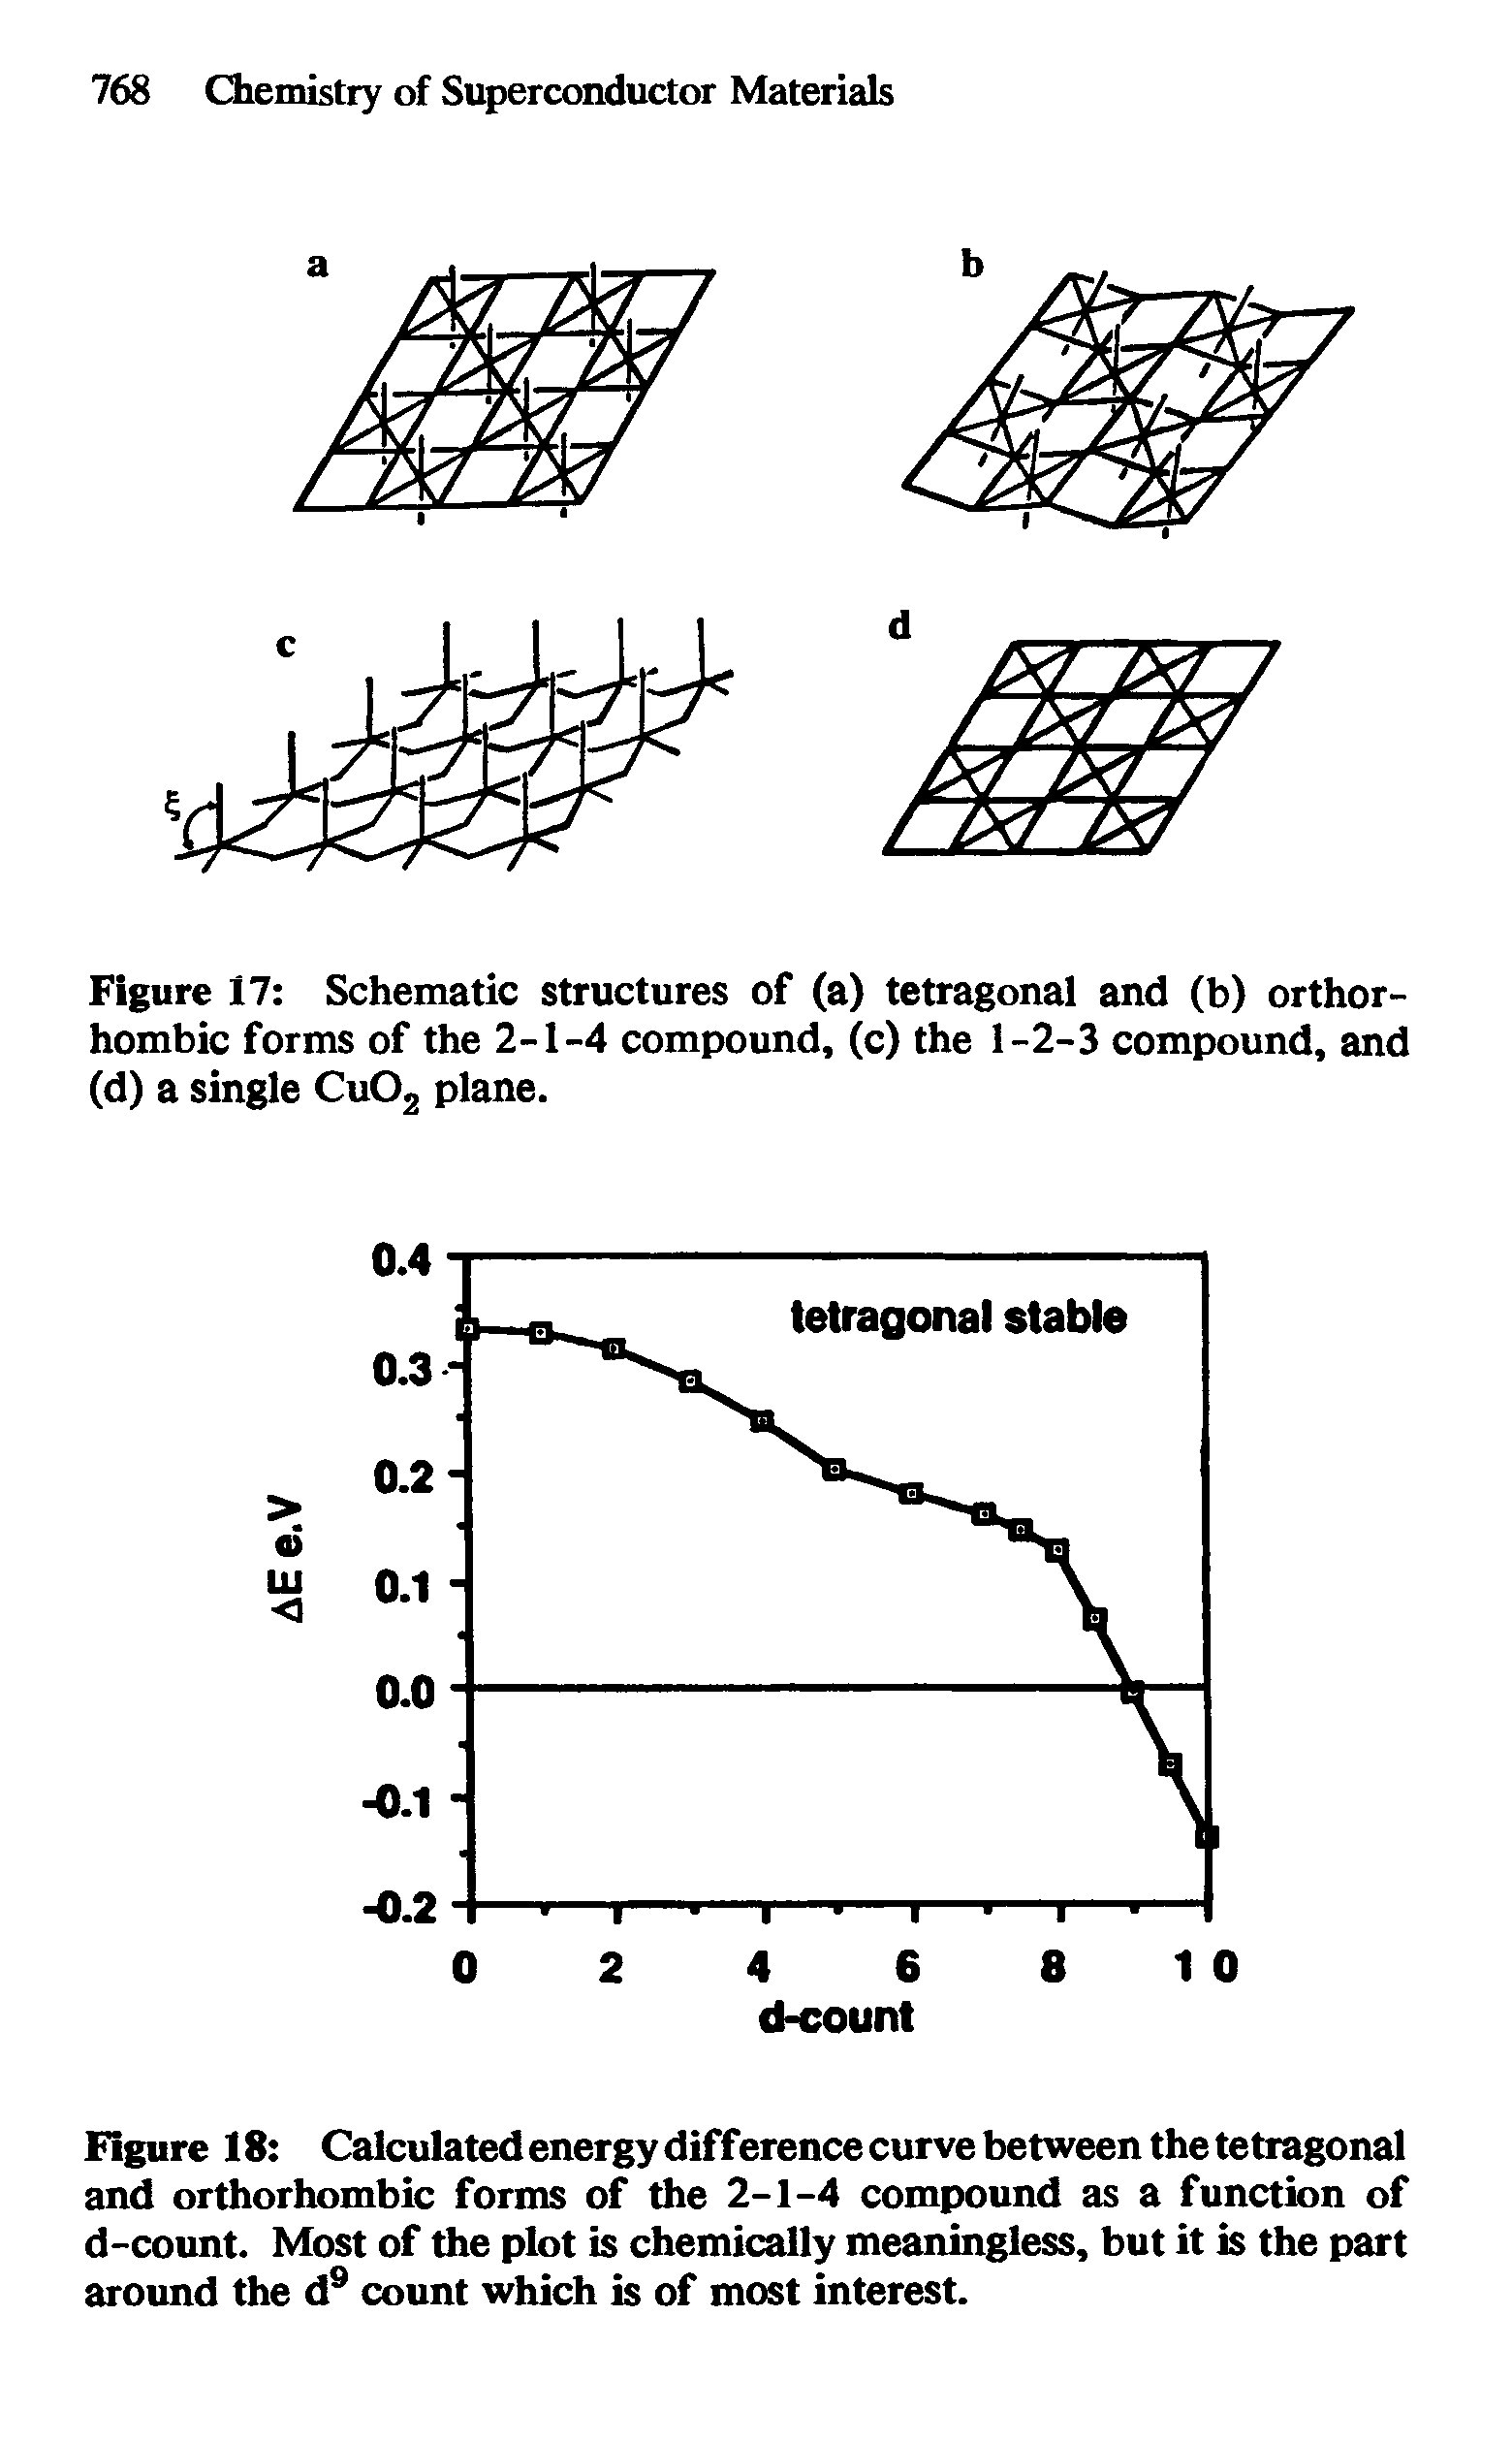 Figure 18 Calculated energy dif f erence curve between the tetragonal and orthorhombic forms of the 2-1-4 compound as a function of d-count. Most of the plot is chemically meaningless, but it is the part around the d9 count which is of most interest.